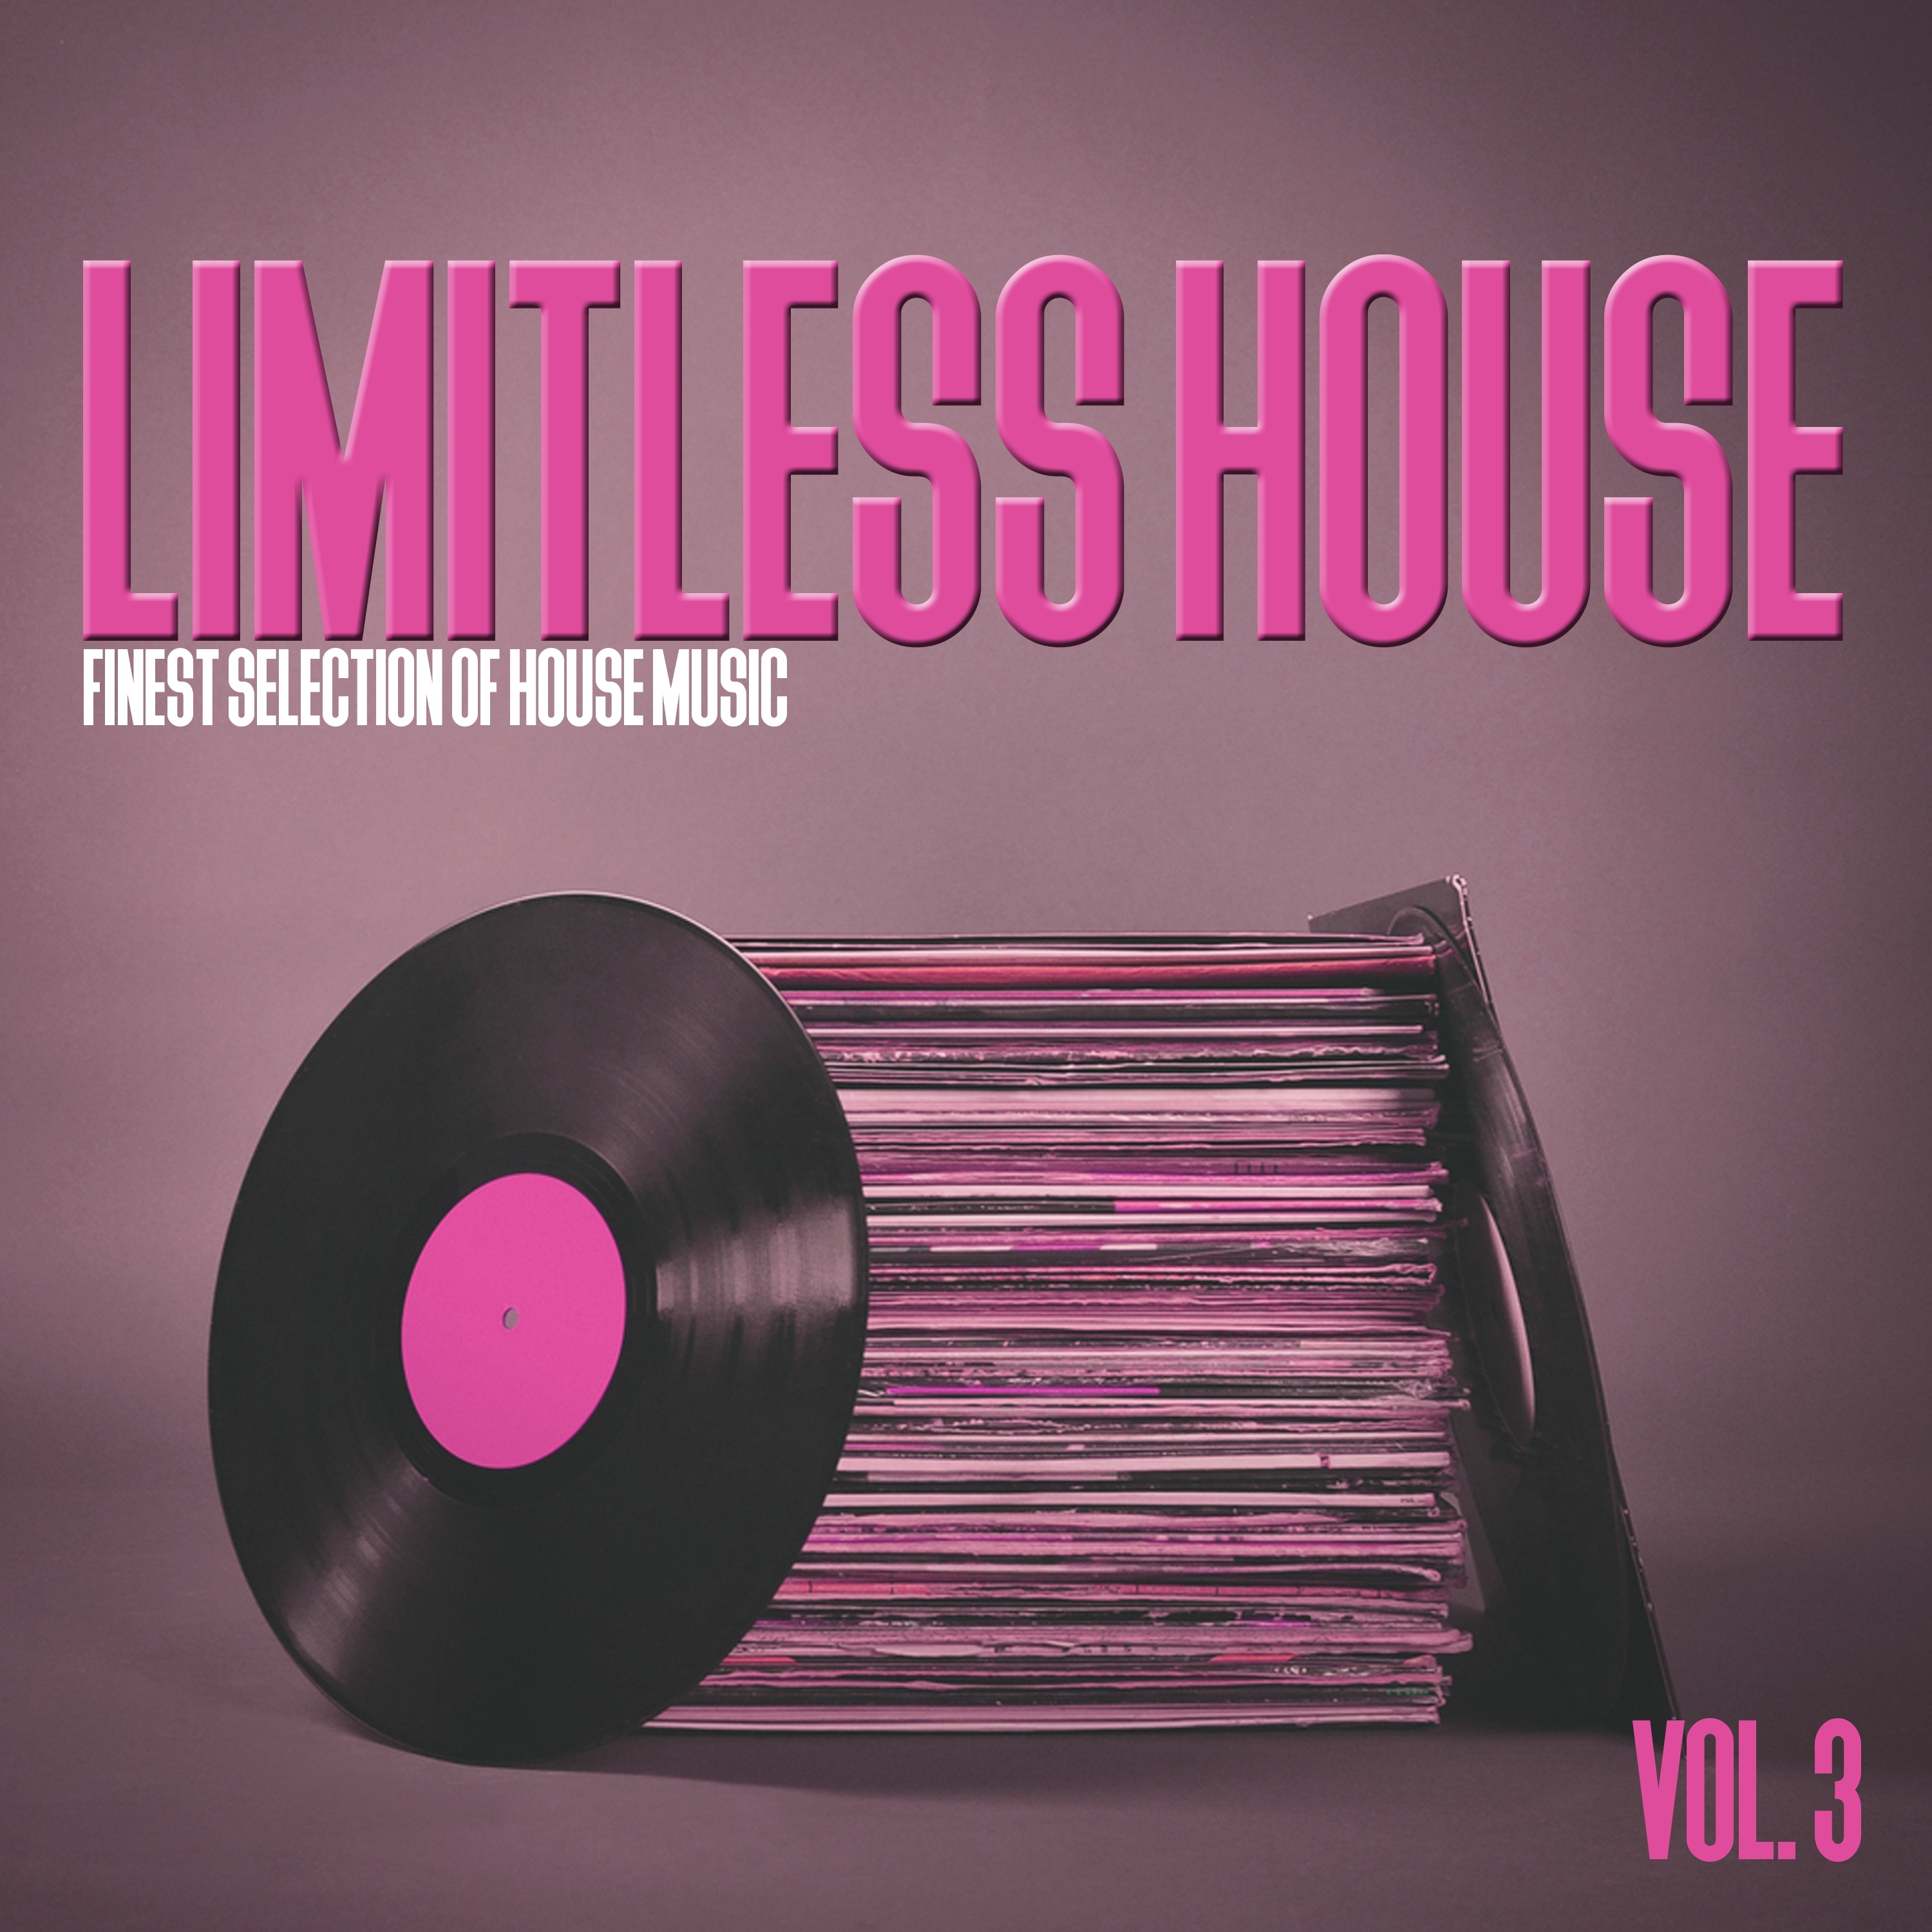 Limitless House, Vol. 3 - Finest Selection of House Music